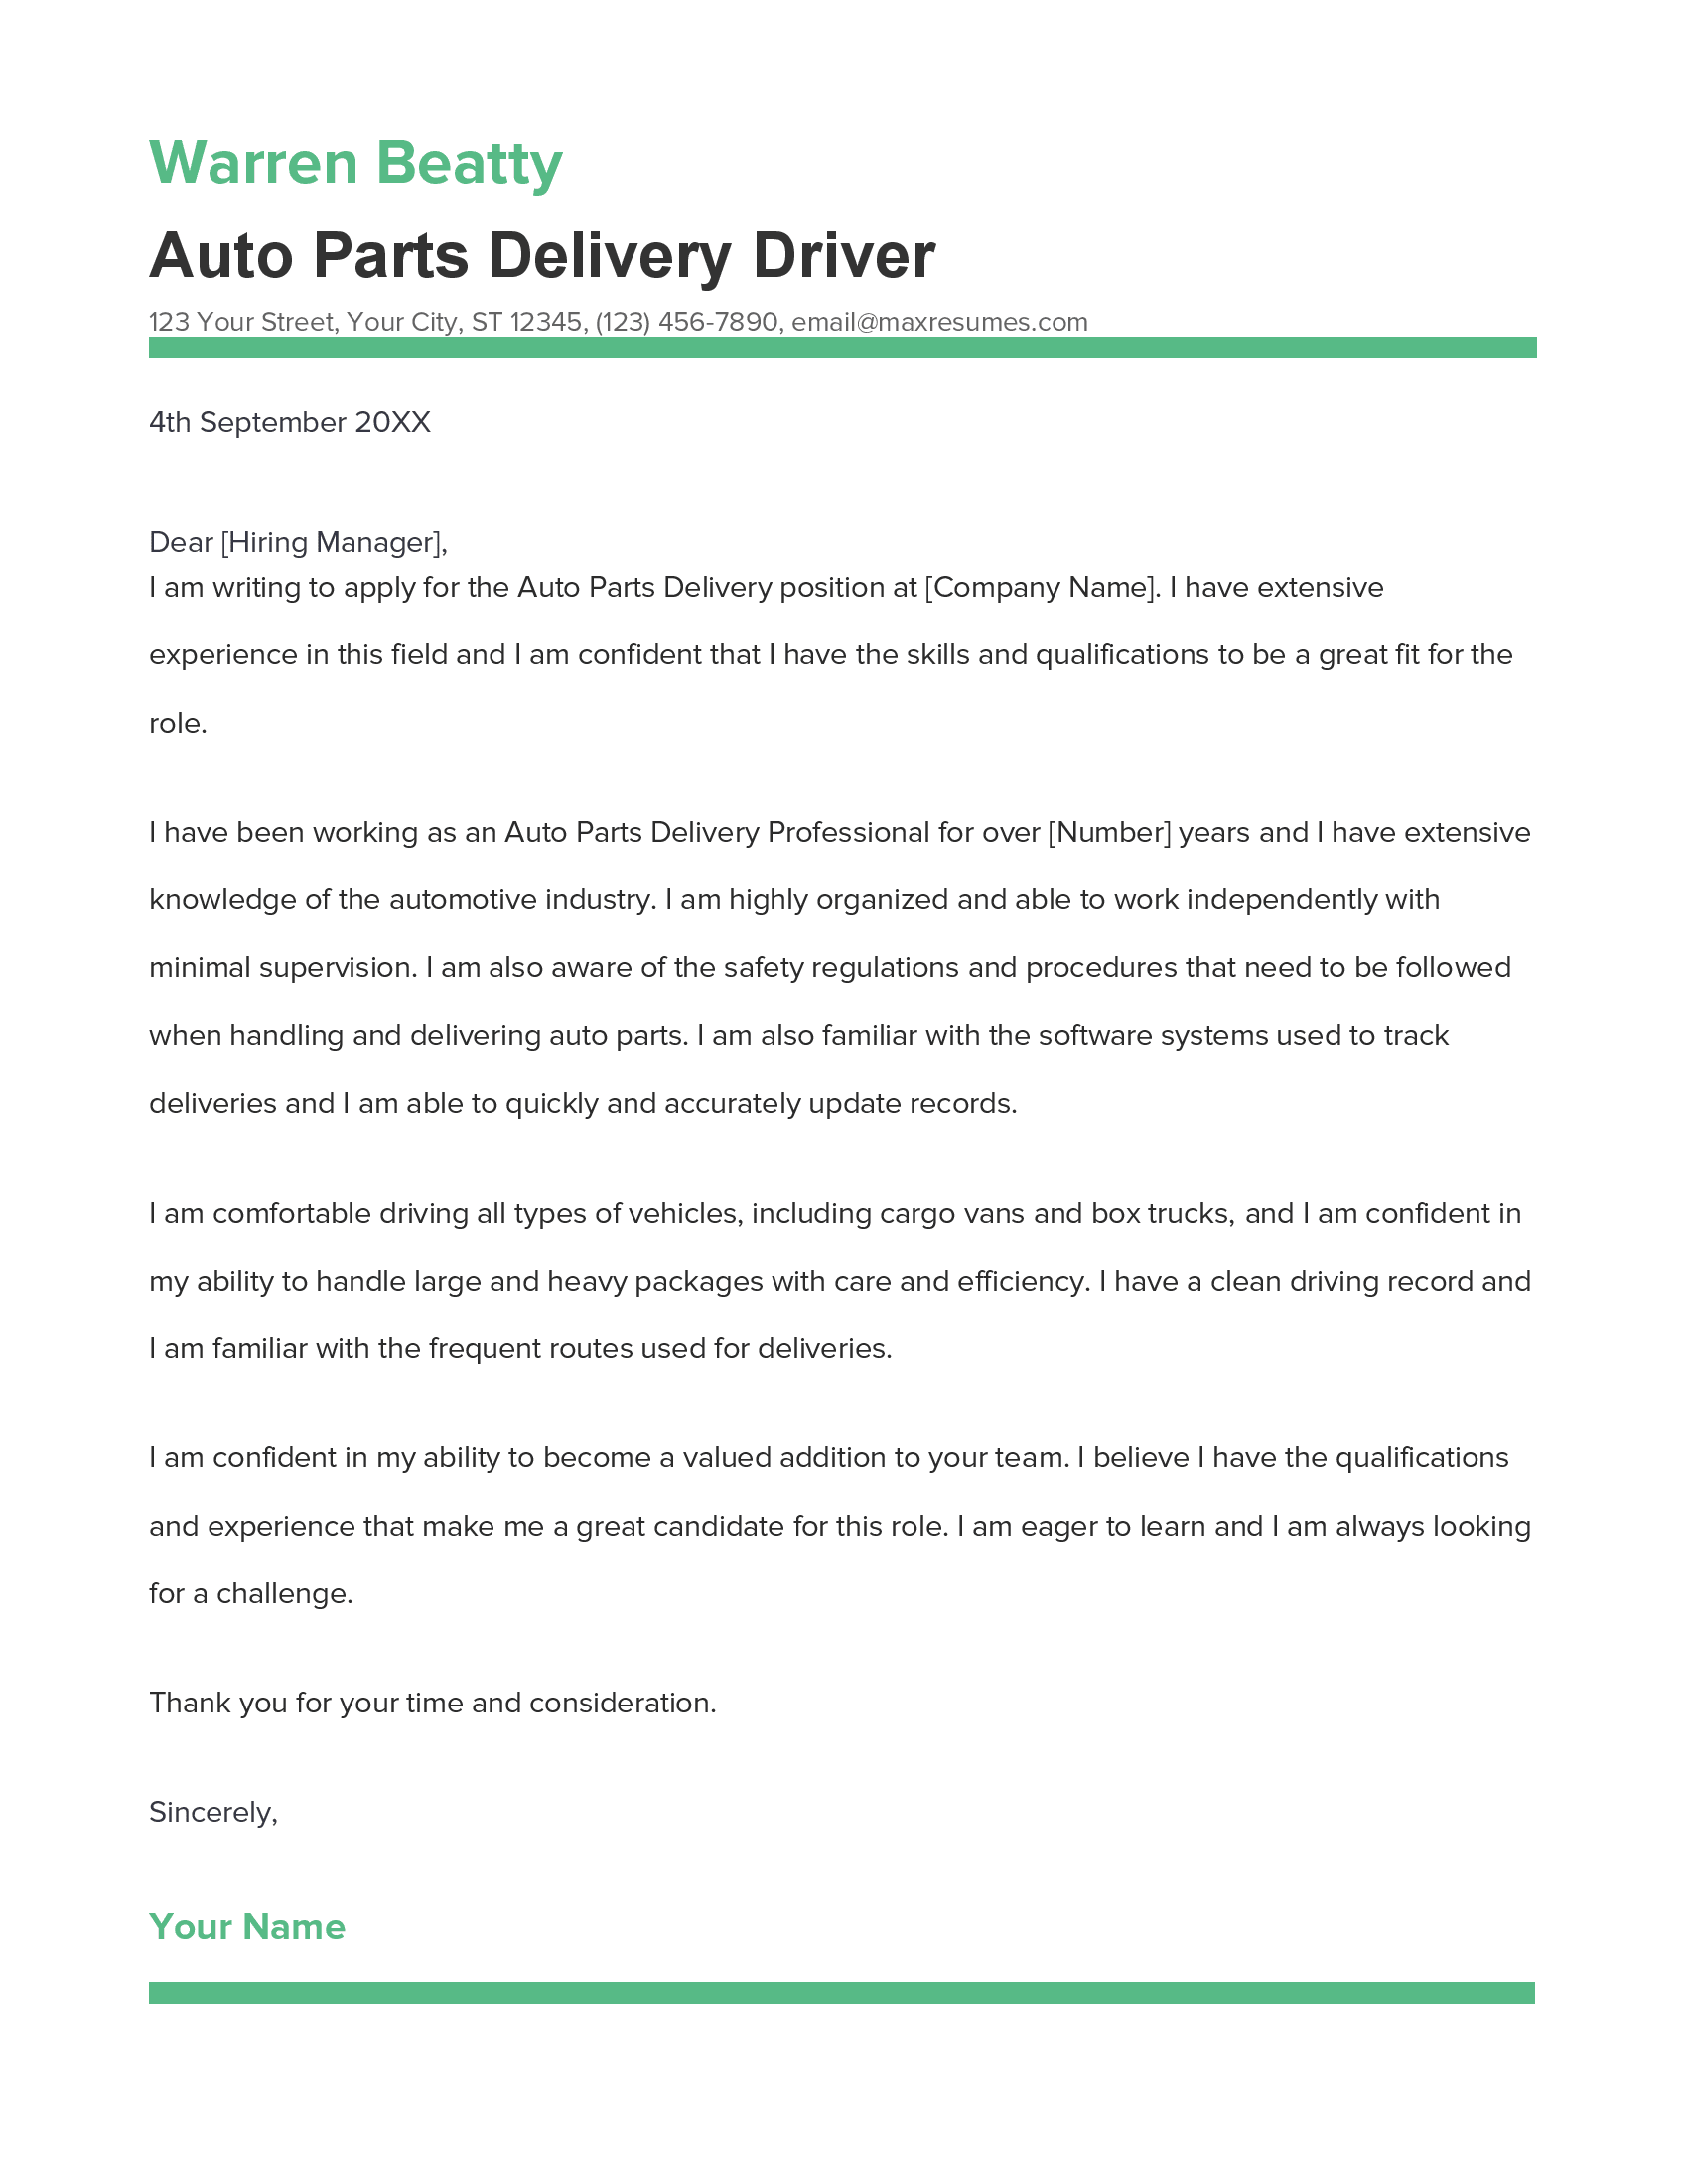 Auto Parts Delivery Driver Cover Letter Example